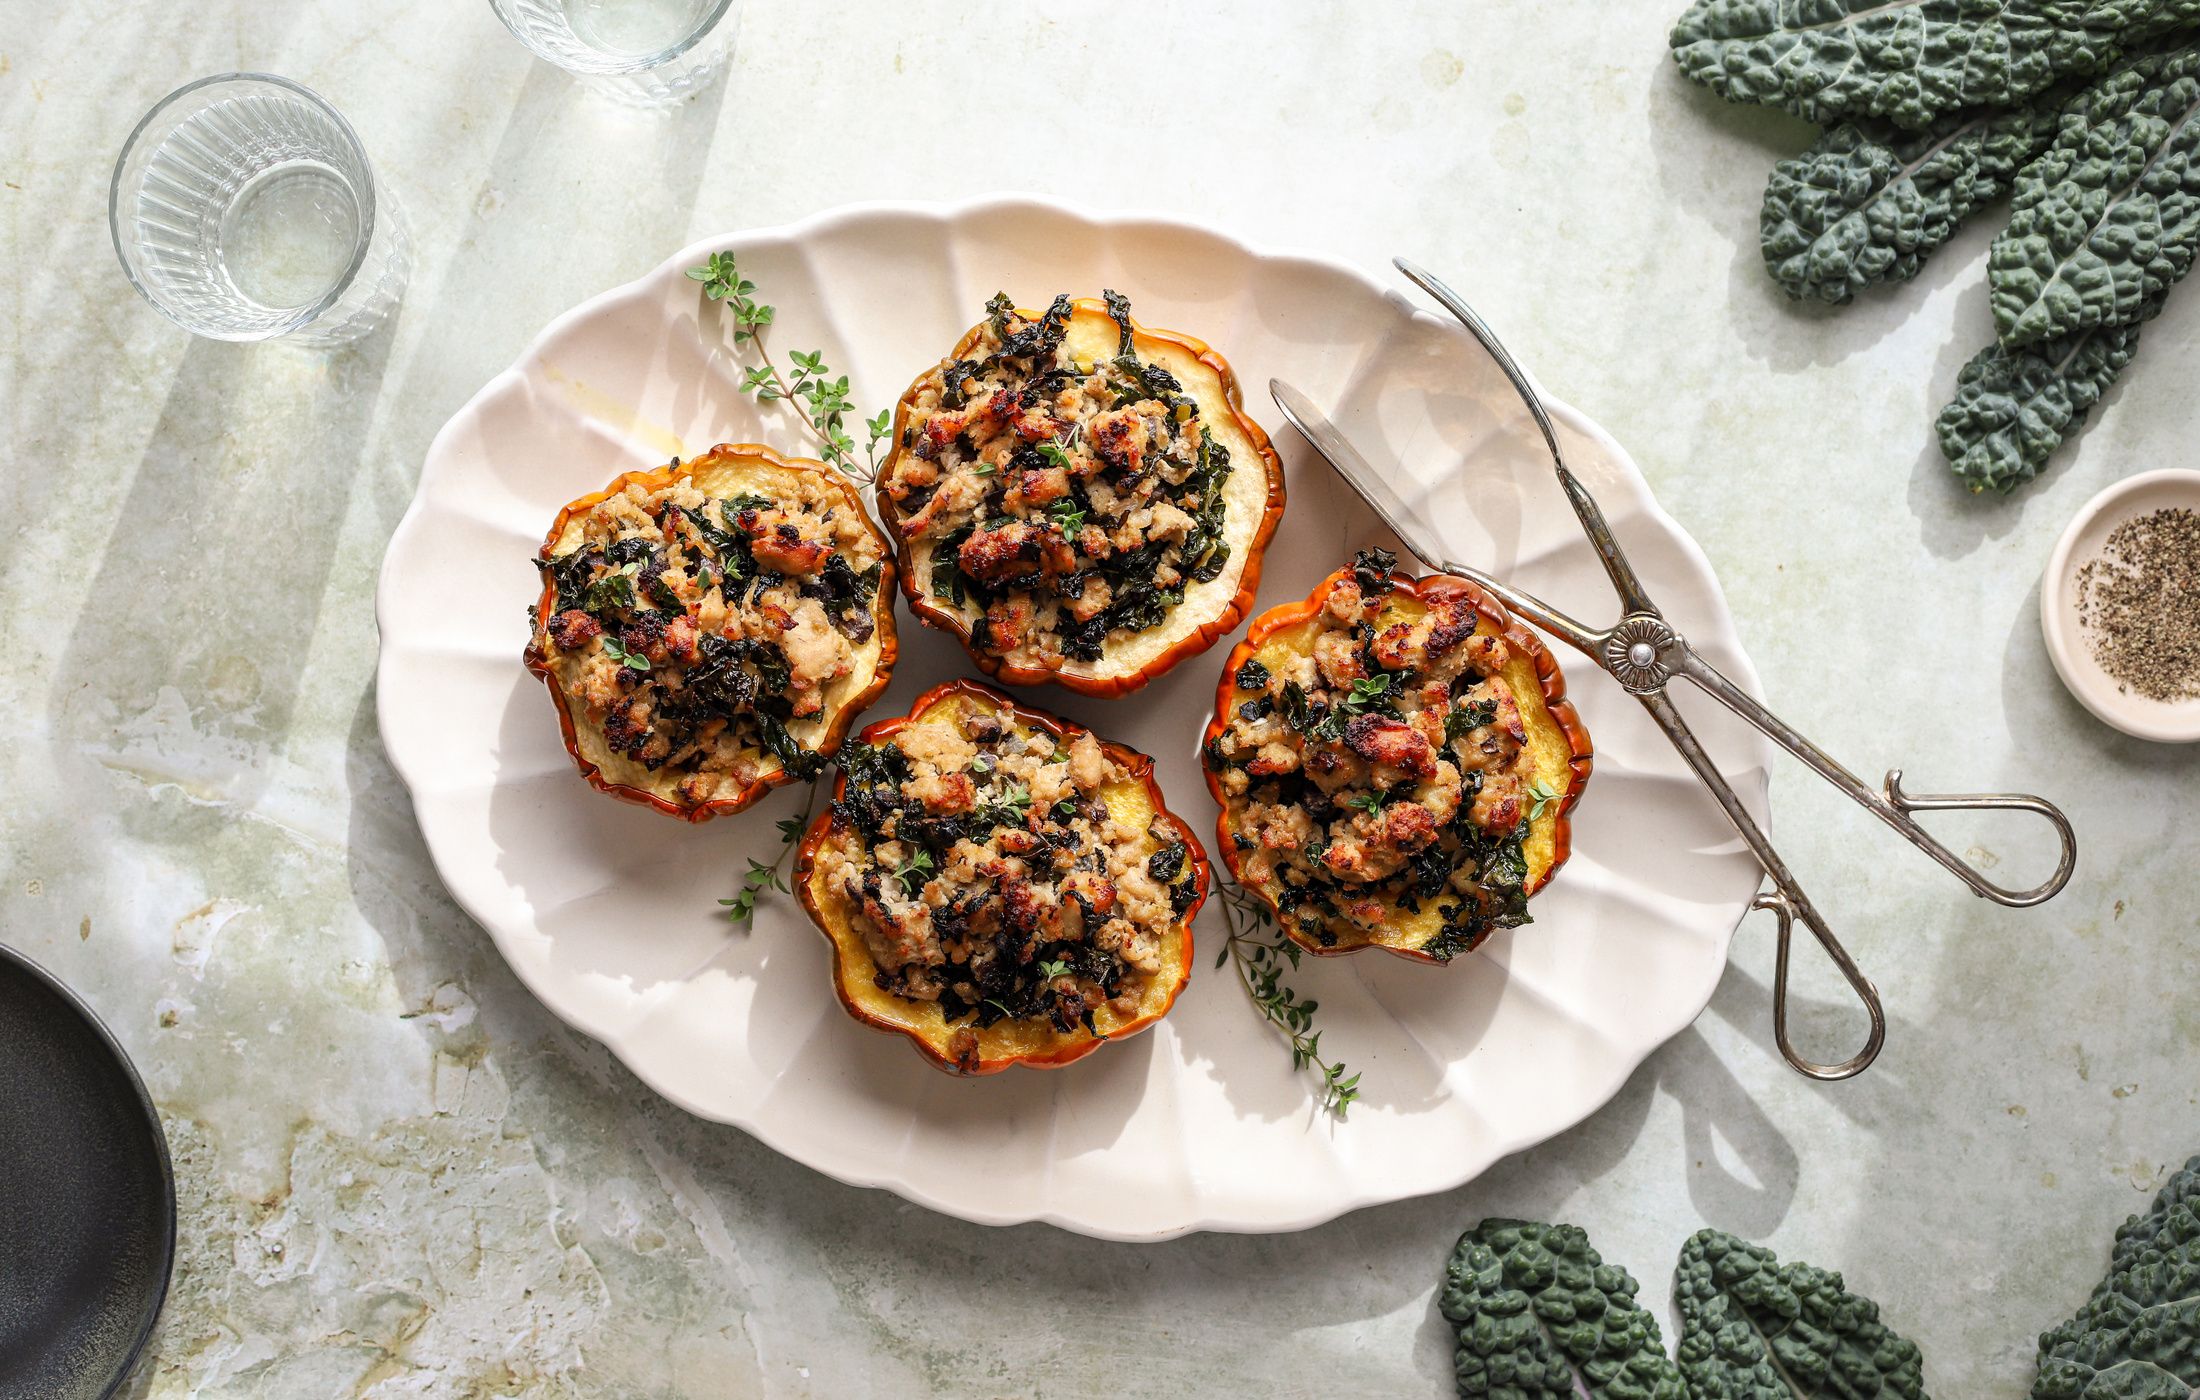 AIP Stuffed Acorn Squash with Chicken and Kale